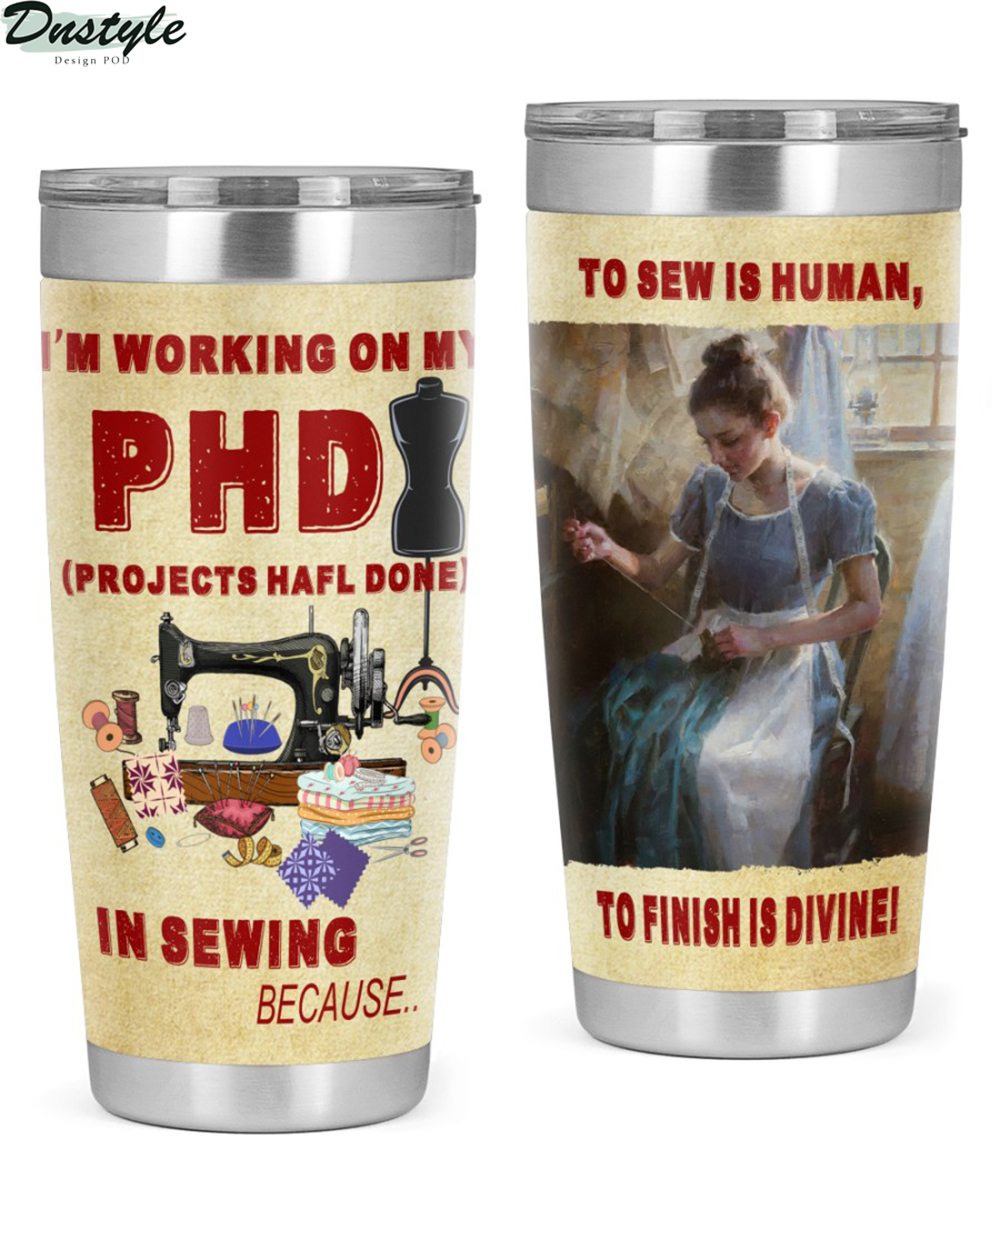 I'm working on my PHD in sewing tumbler